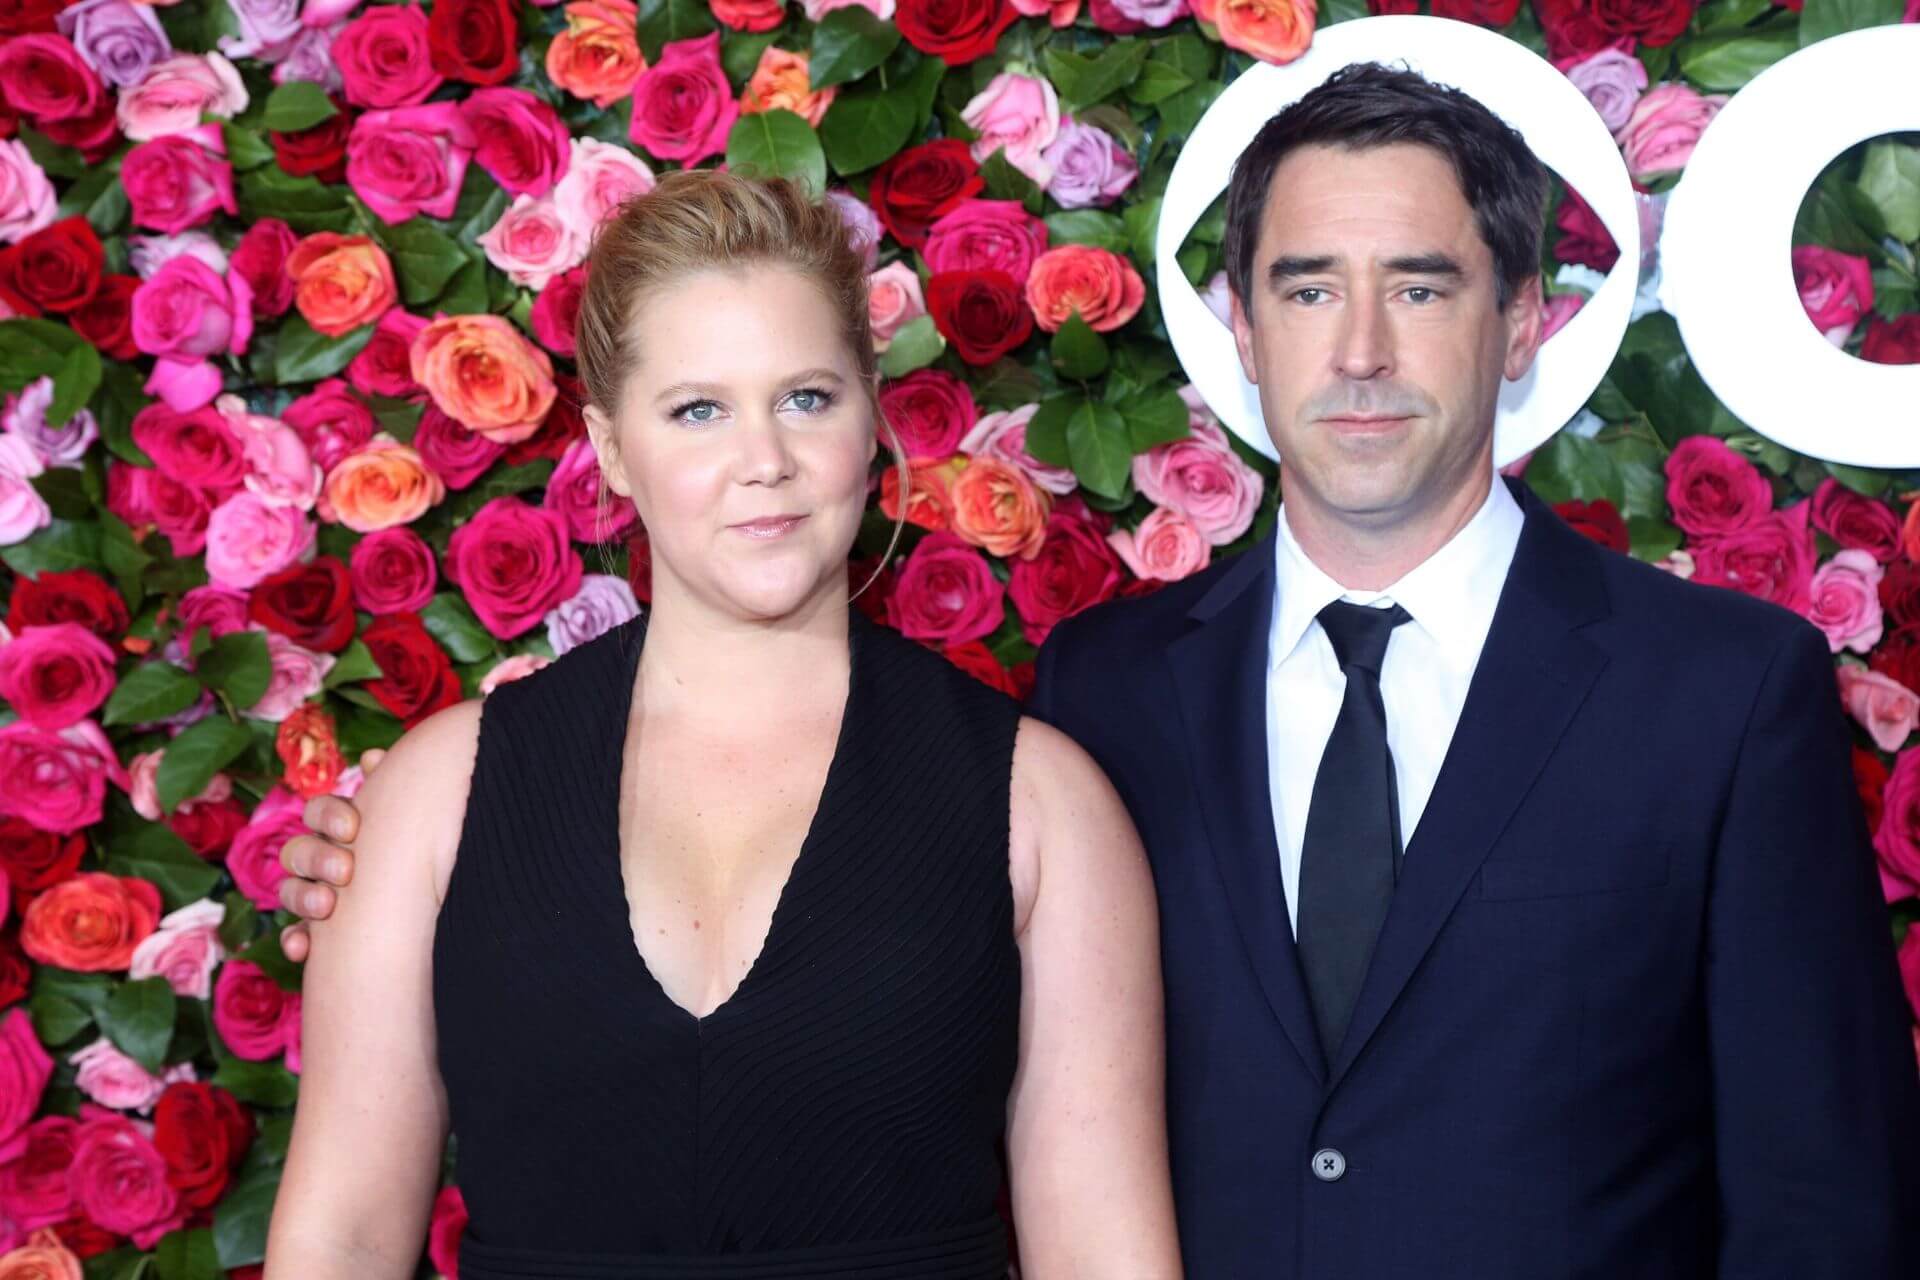 Amy Schumer and Chris Fischer welcome a baby boy